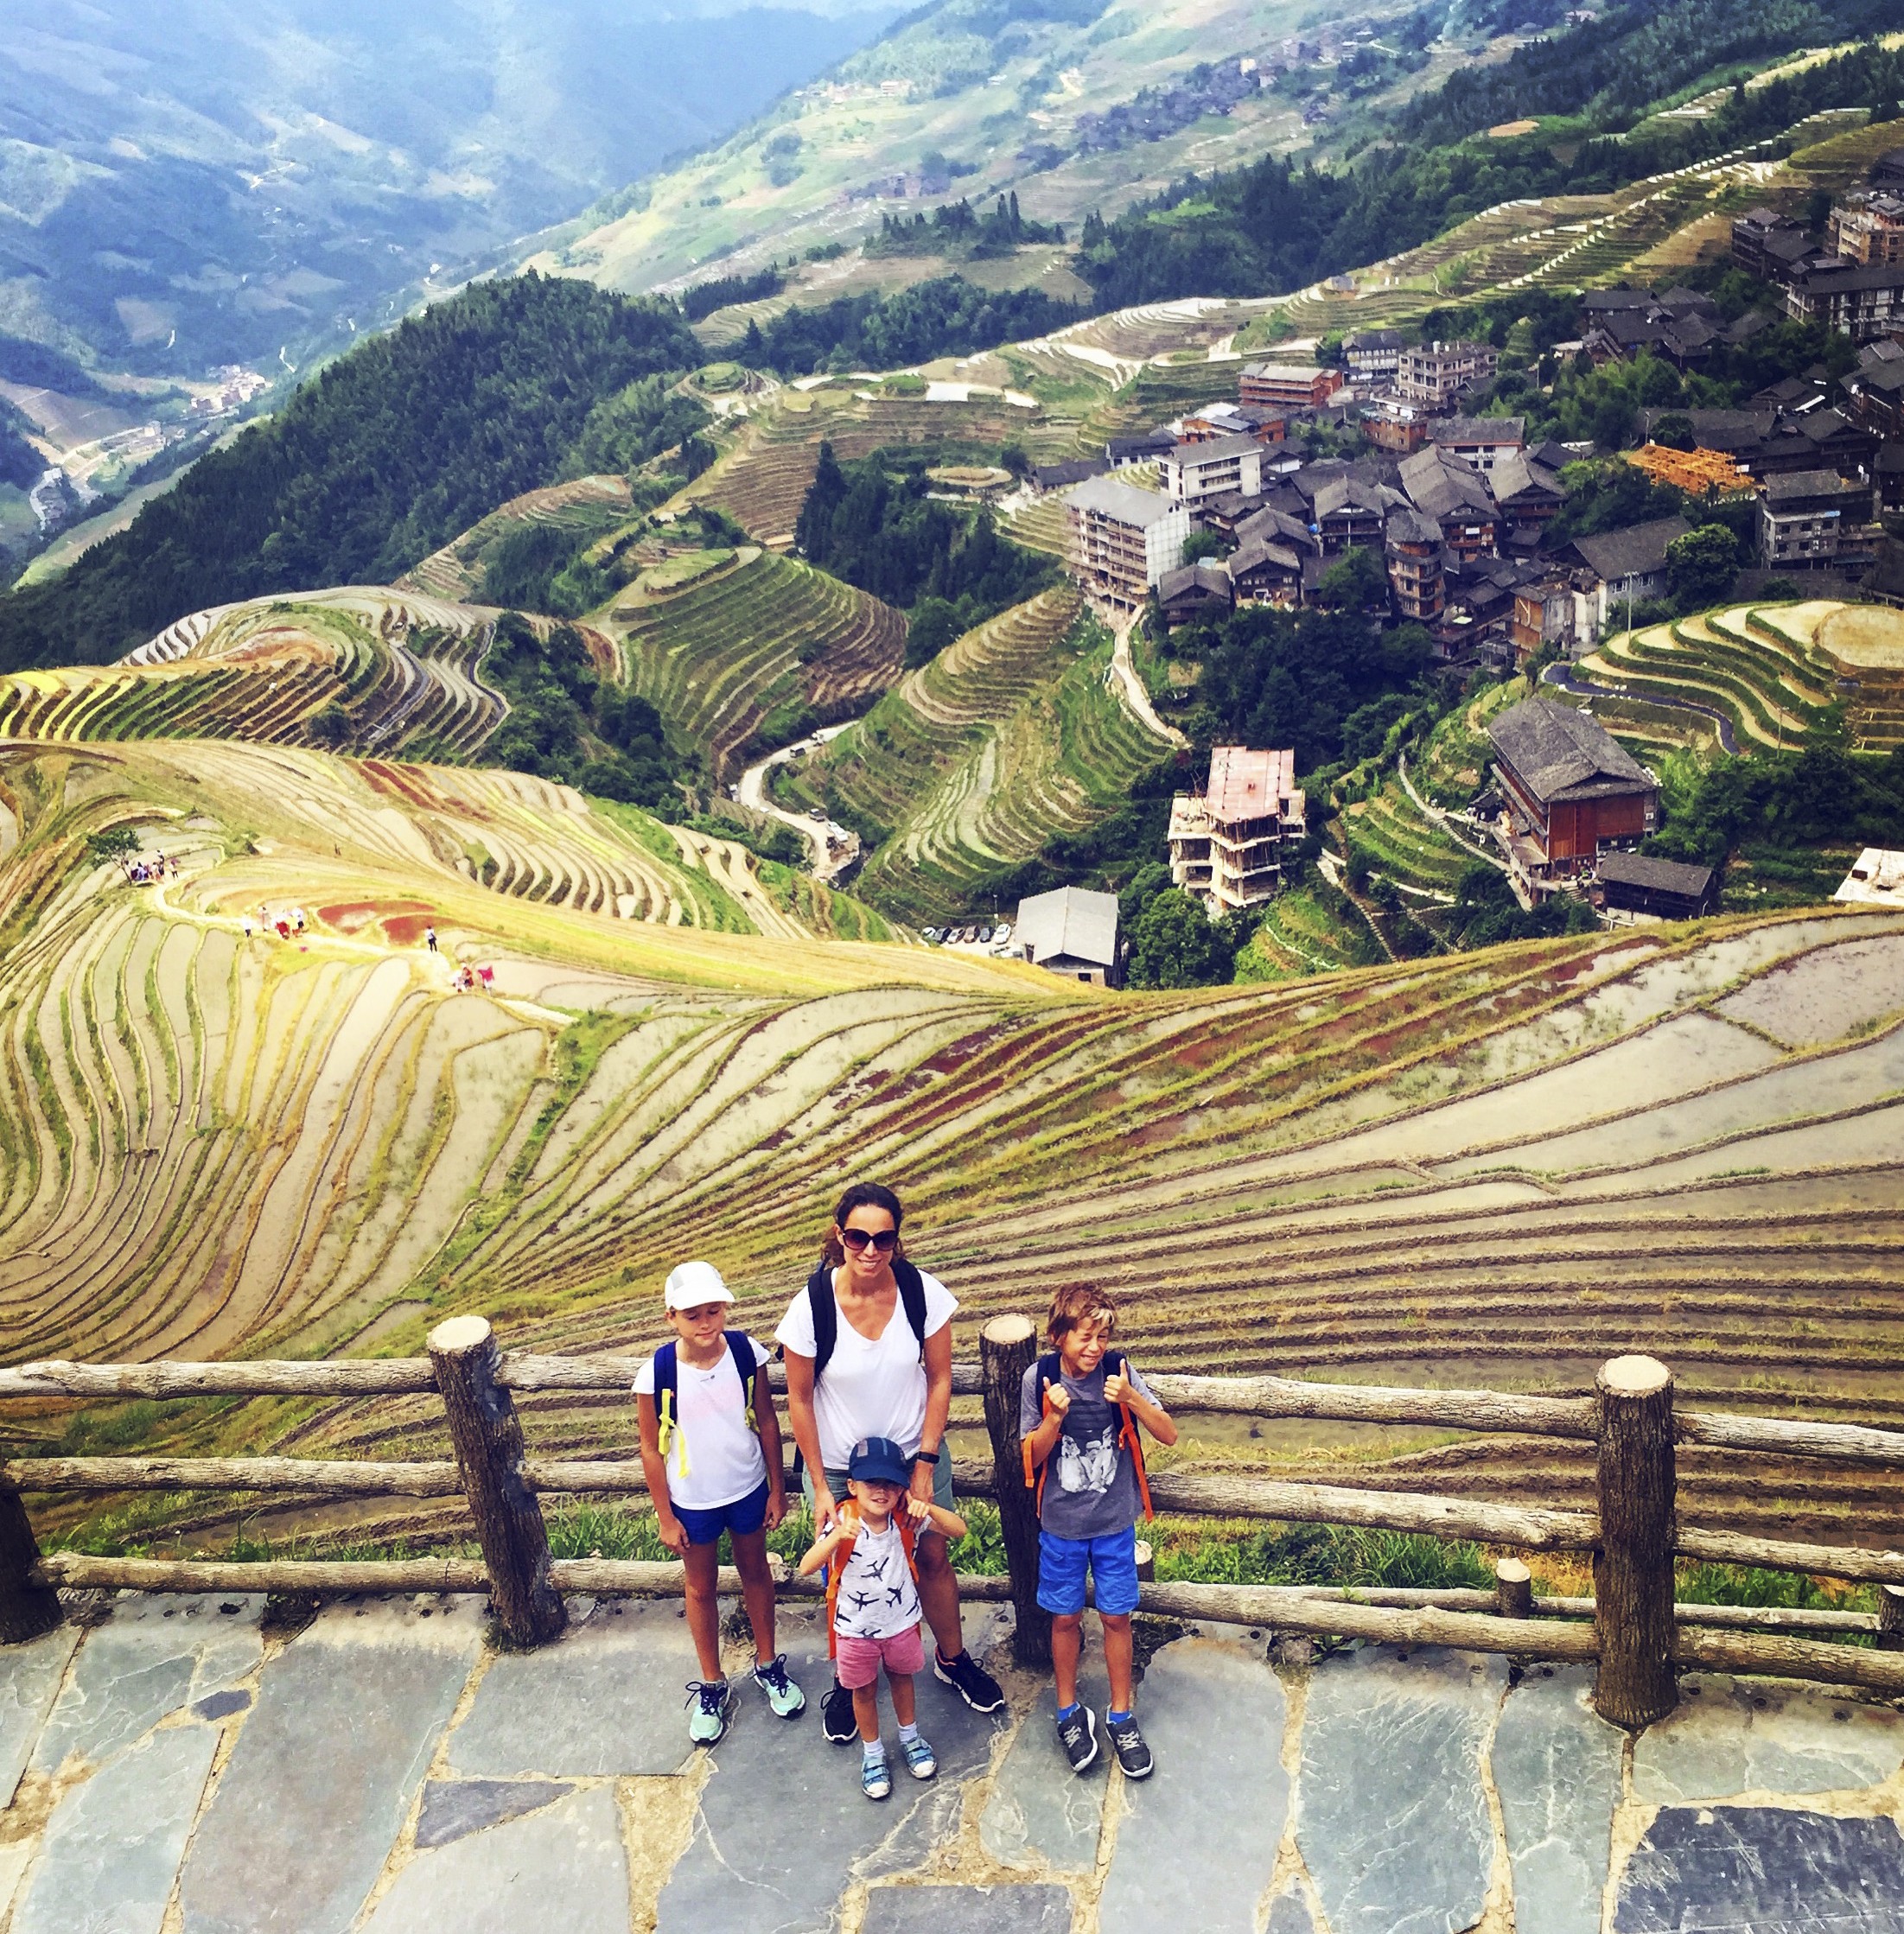 Cecile Pont and her children in Rice fields in Guilin, China.